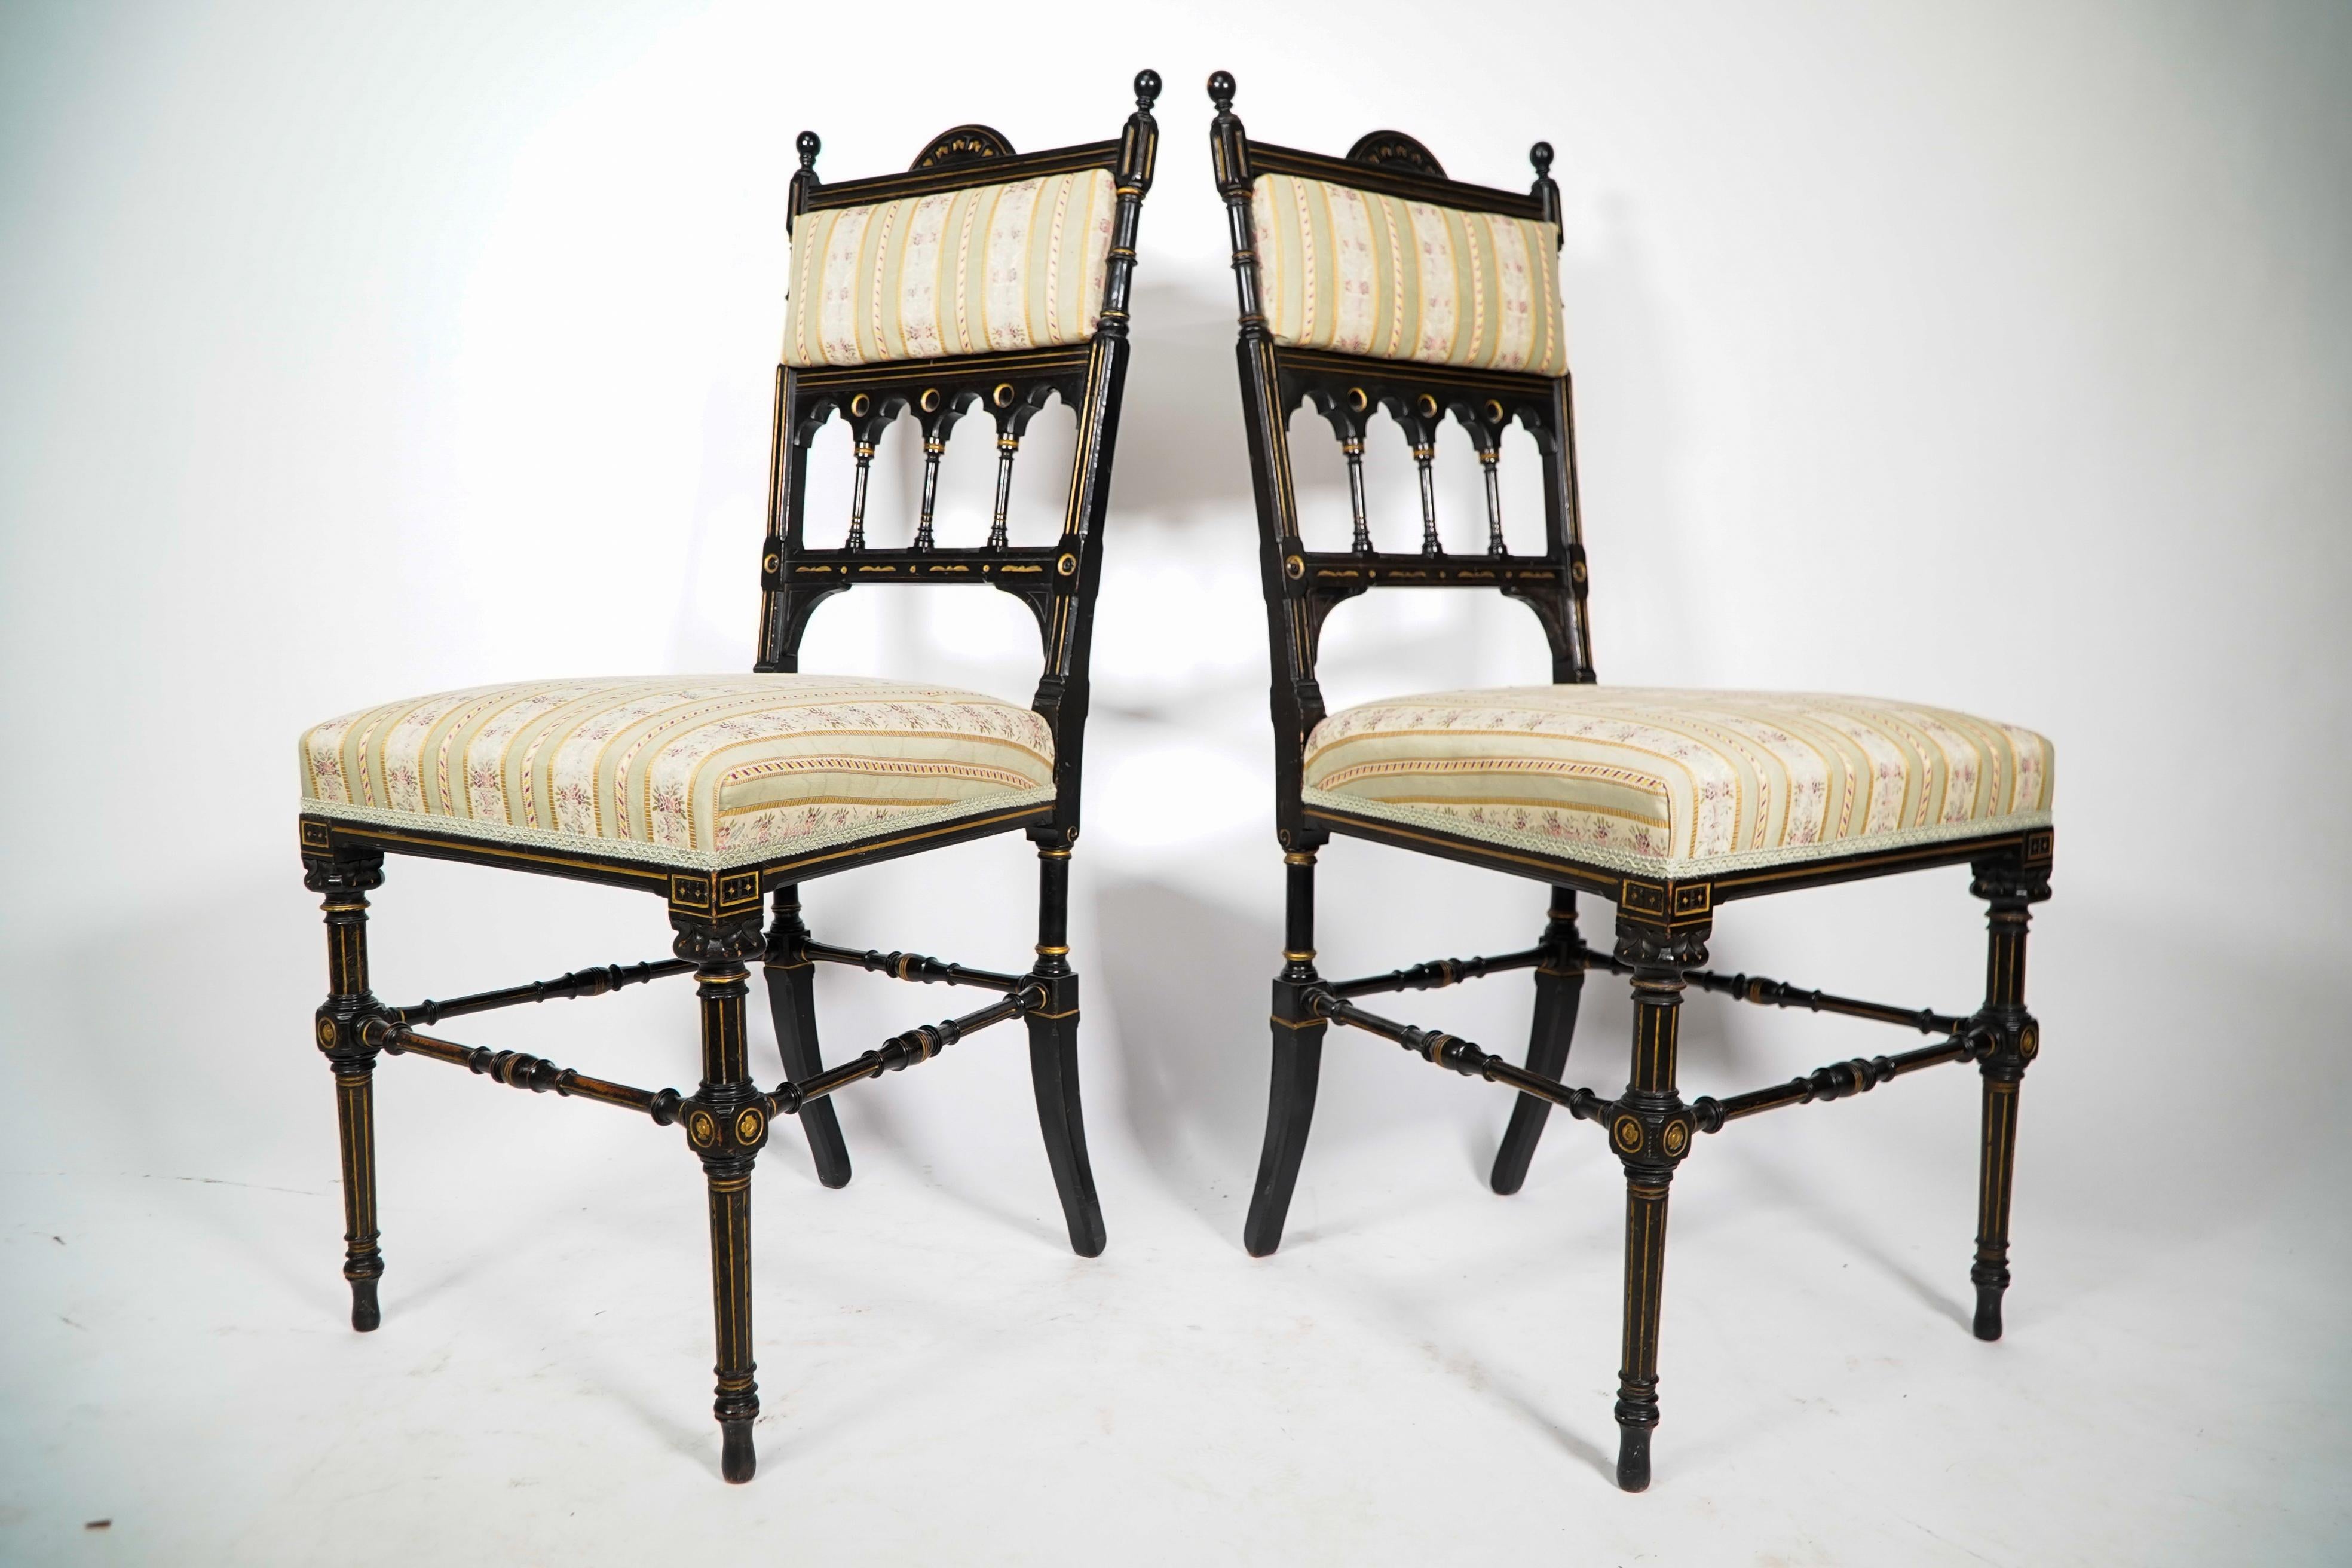 English Whytock & Reid. A pair of Aesthetic Movement ebonized & parcel gilt side chairs. For Sale